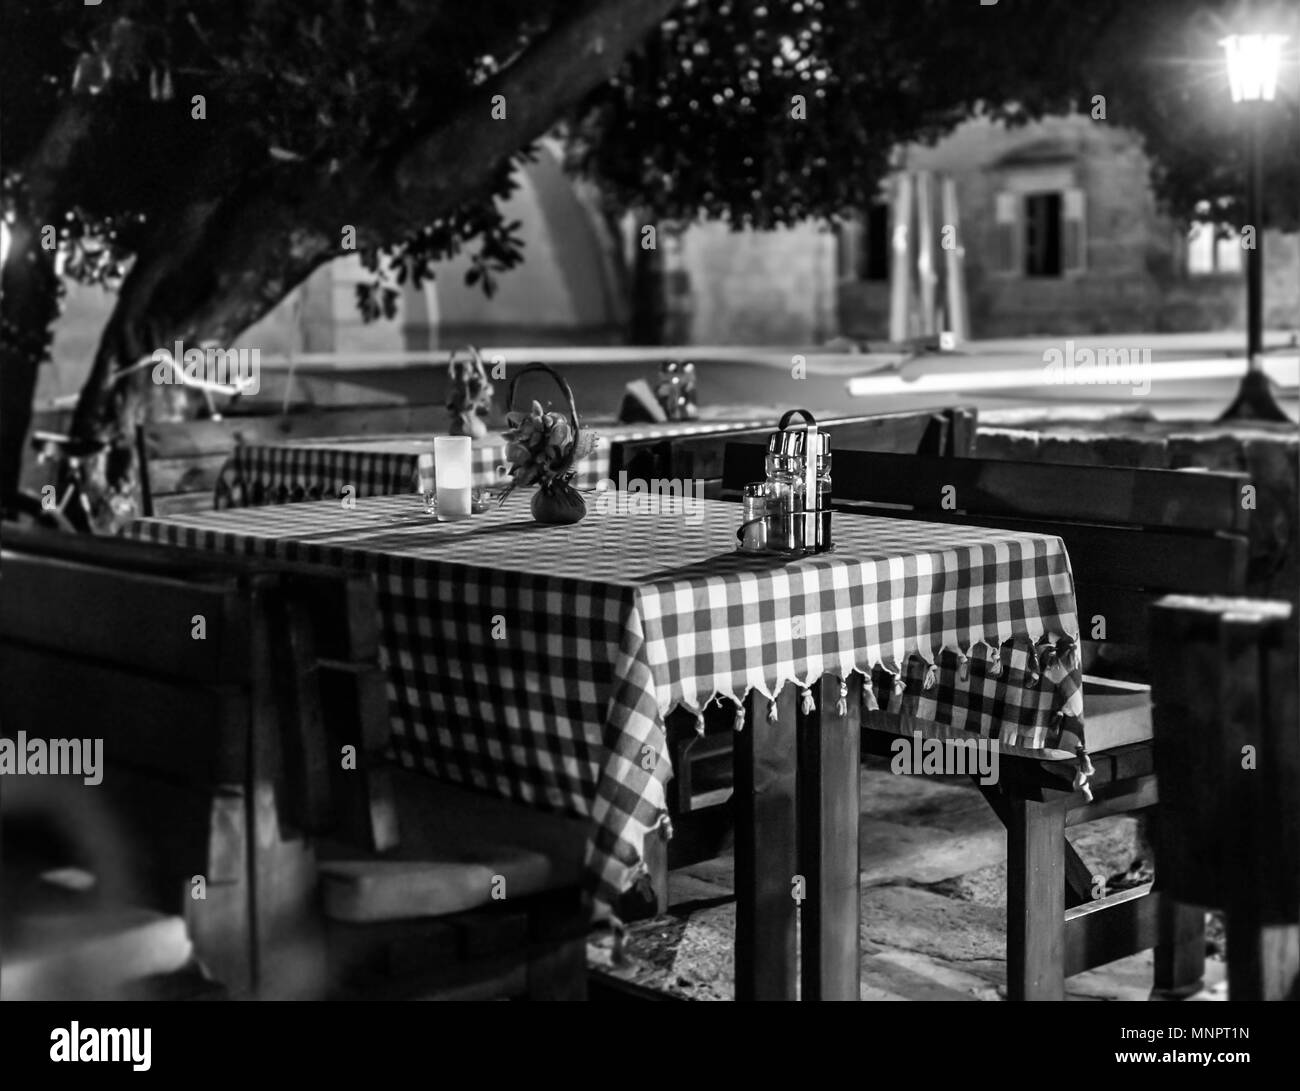 Monochrome, black and white image of empty dining tables. Stock Photo